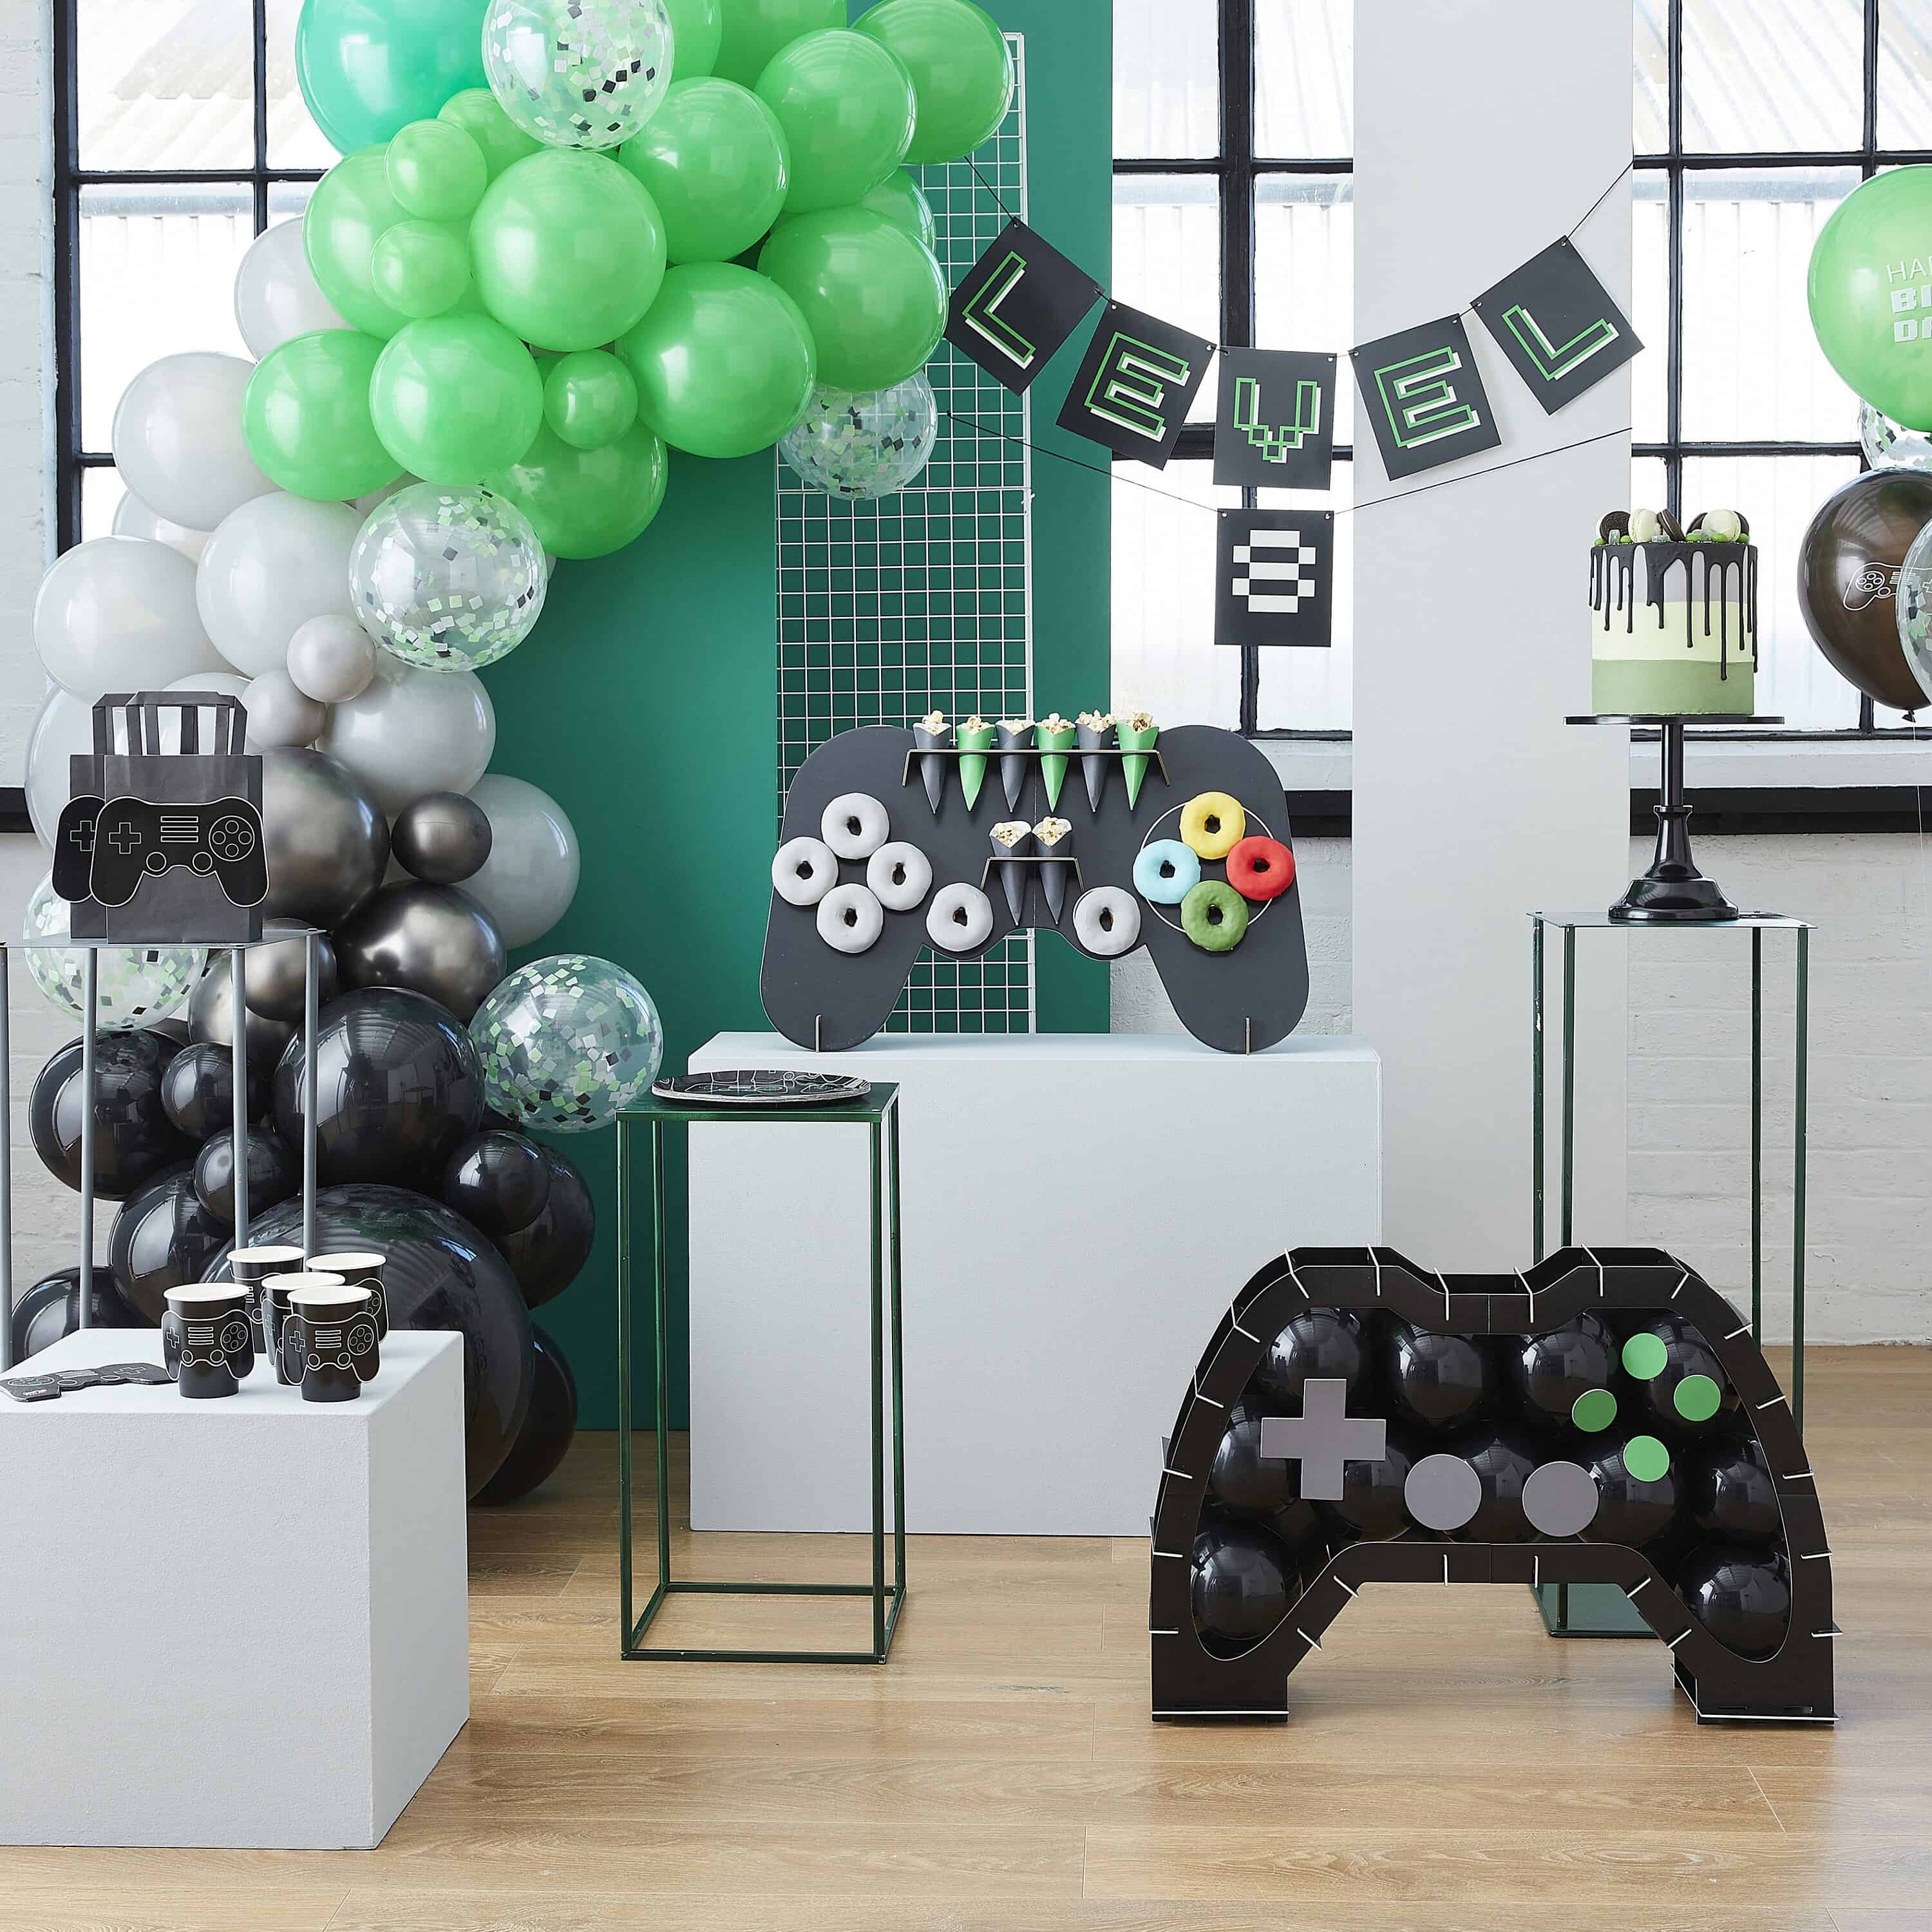 Video Game Theme Party Decorations